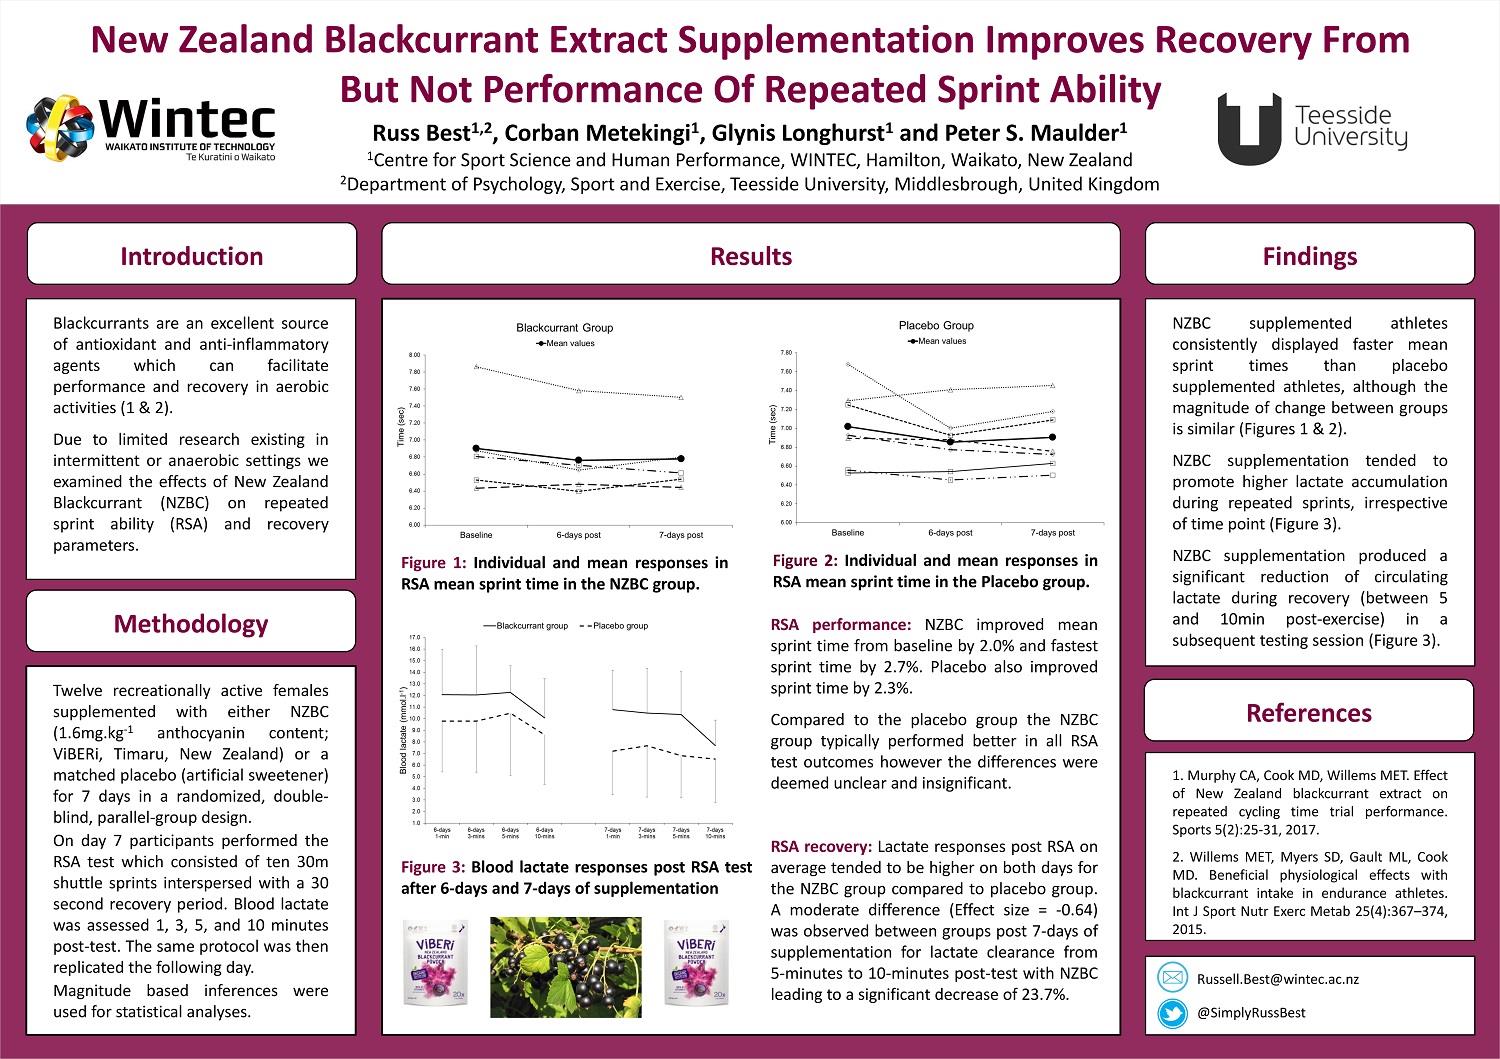 New Zealand Blackcurrant Extract Supplementation Improves Recovery From But Not Performance Of Repeated Sprint Ability